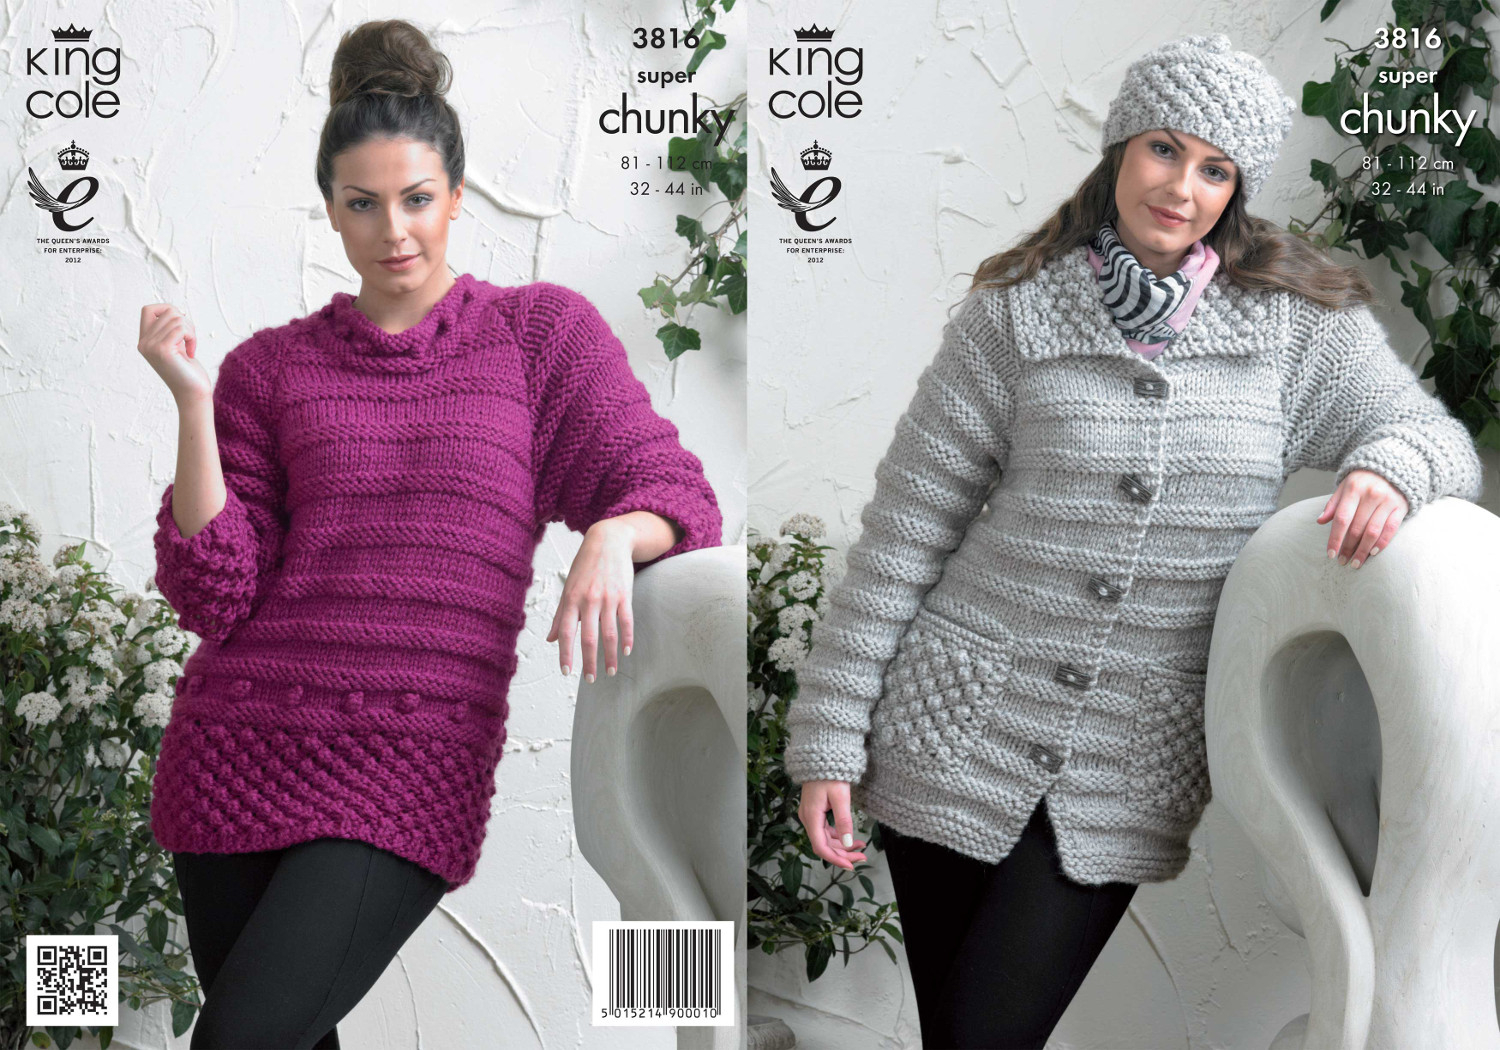 Knitting Patterns For Women Details About King Cole Ladies Knitting Pattern Womens Super Chunky Jacket Sweater Hat 3816